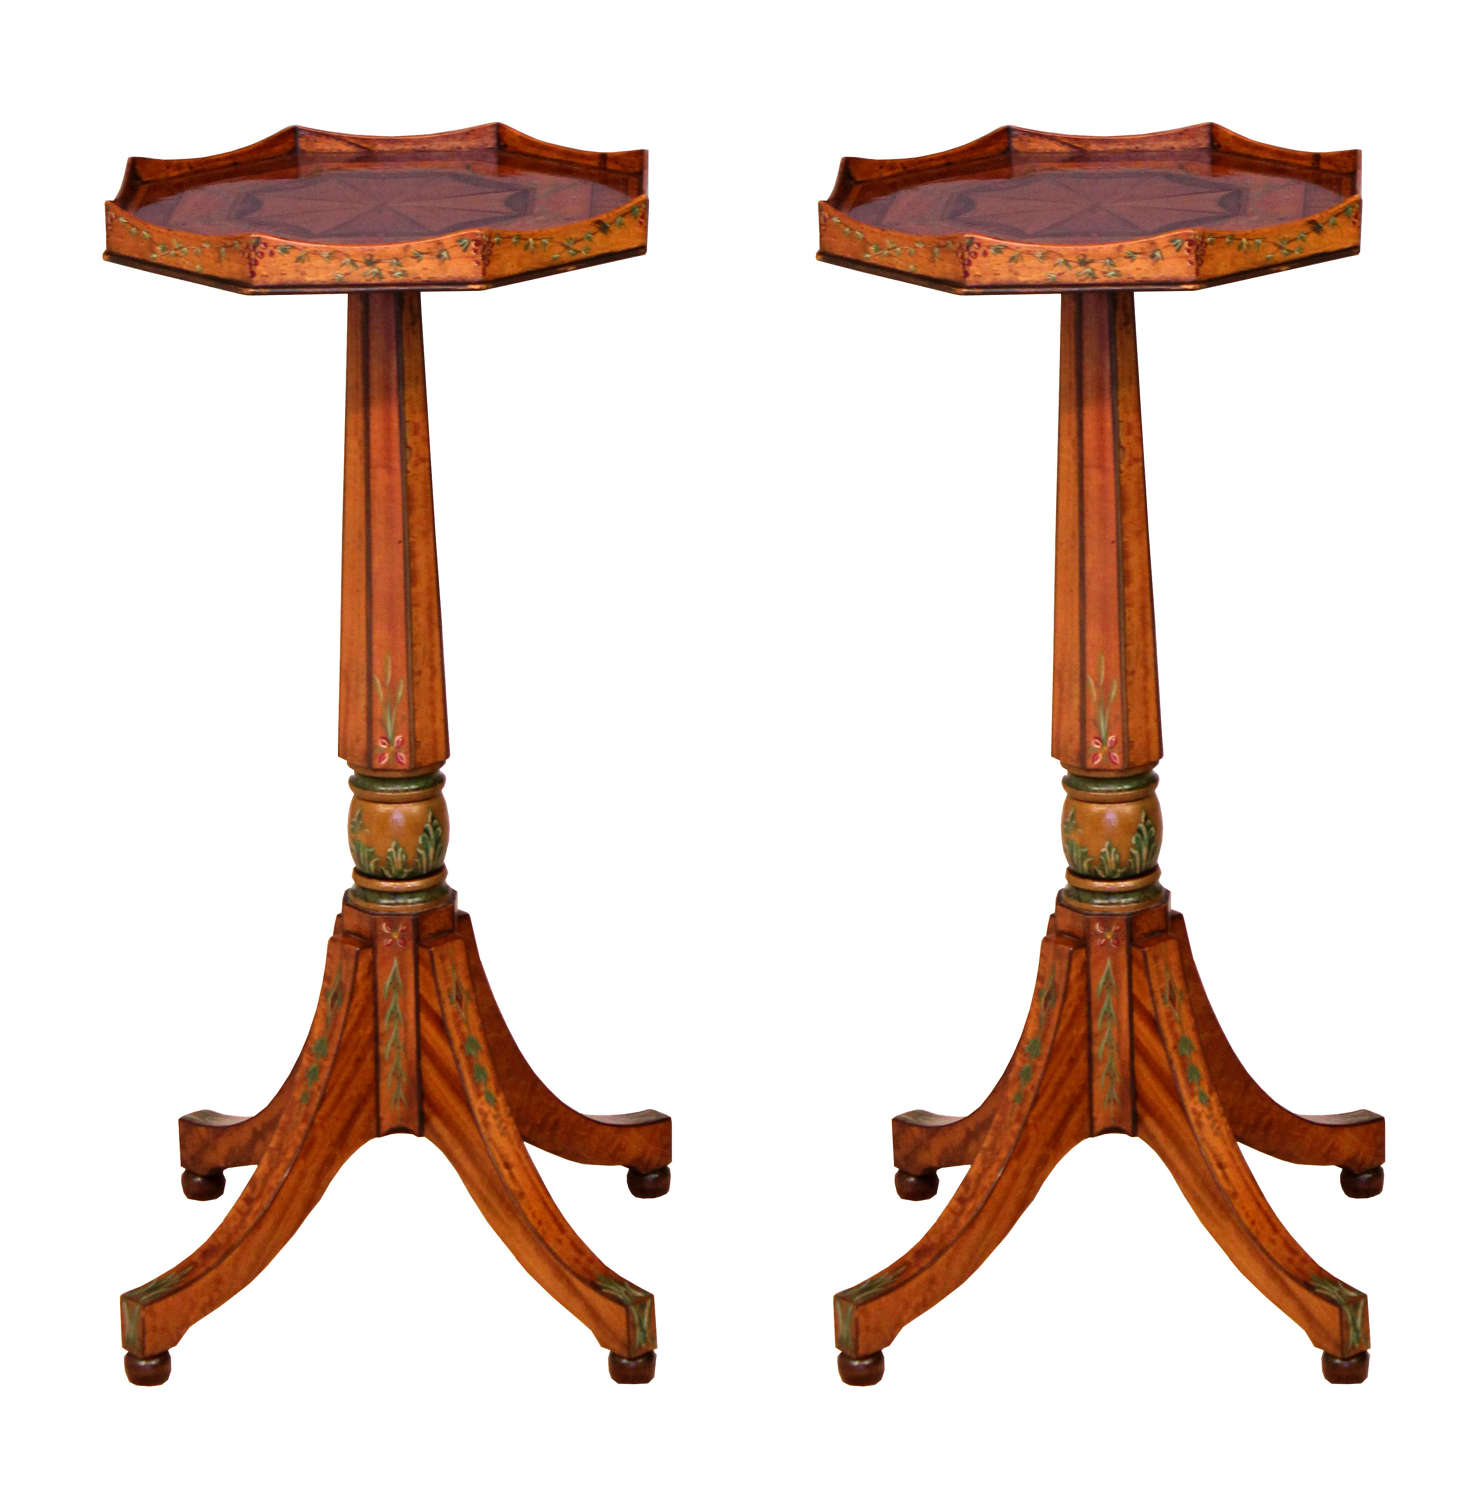 A Quality Pair of Edwardian Inlaid and Painted Satinwood Side Tables